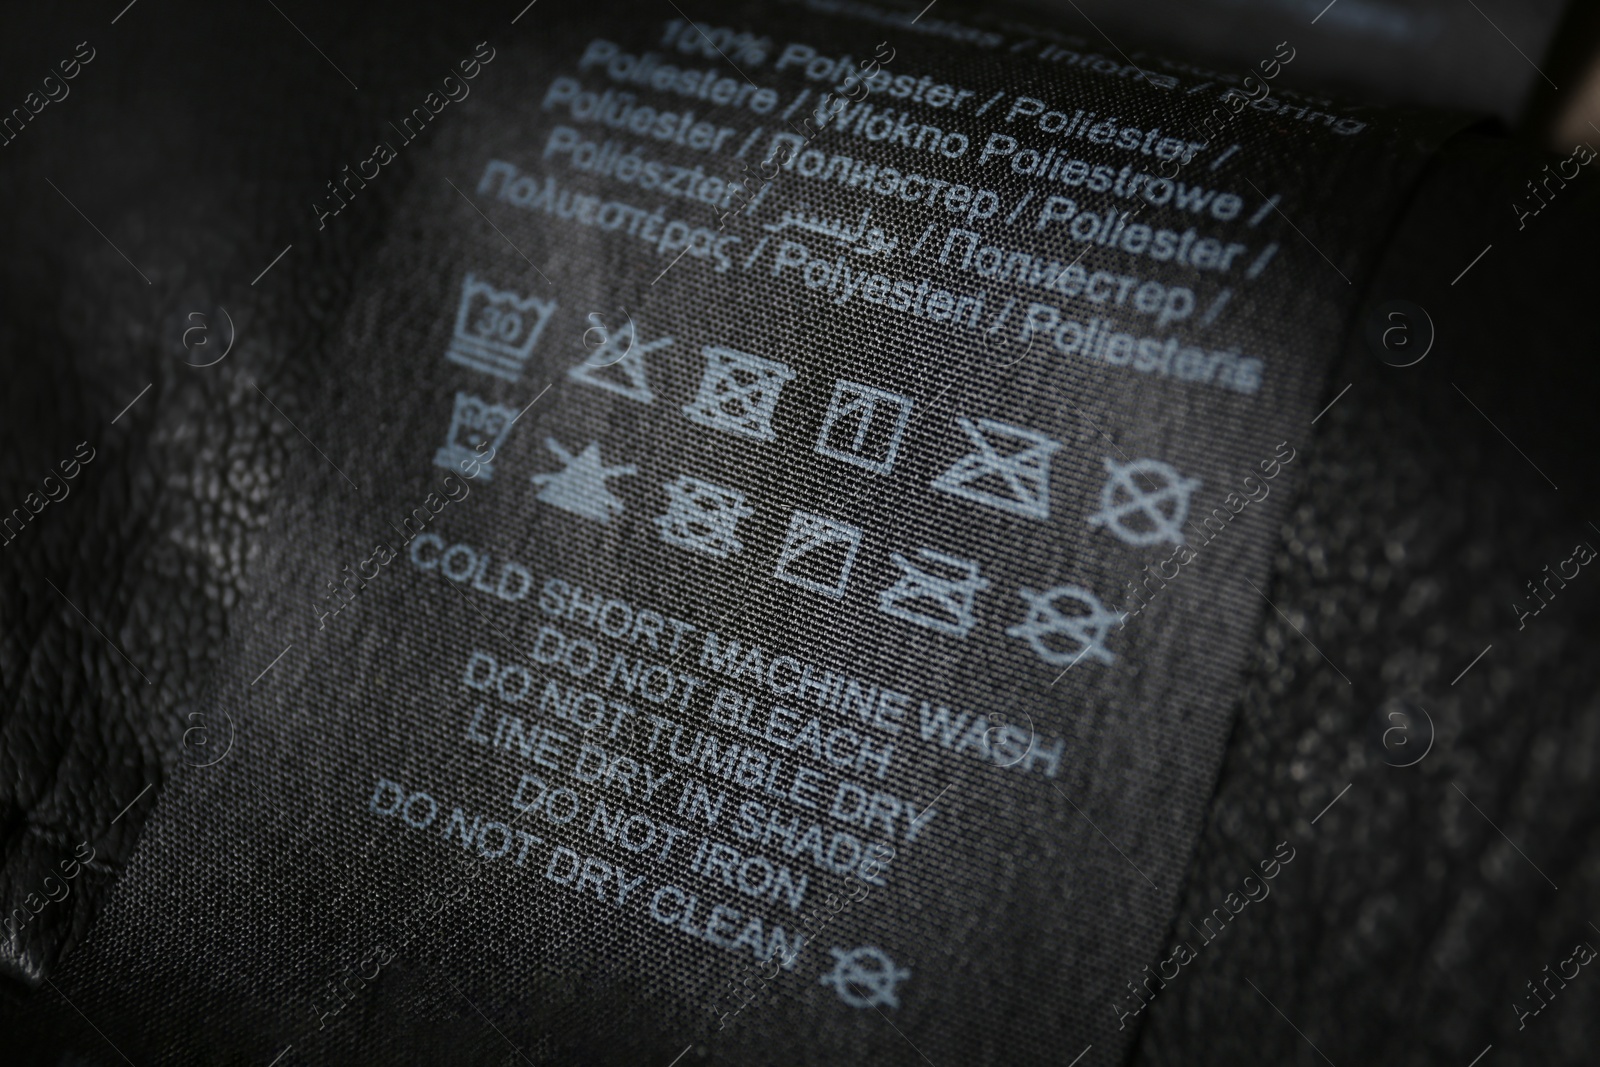 Photo of Clothing label with care symbols and material content on black shirt, closeup view